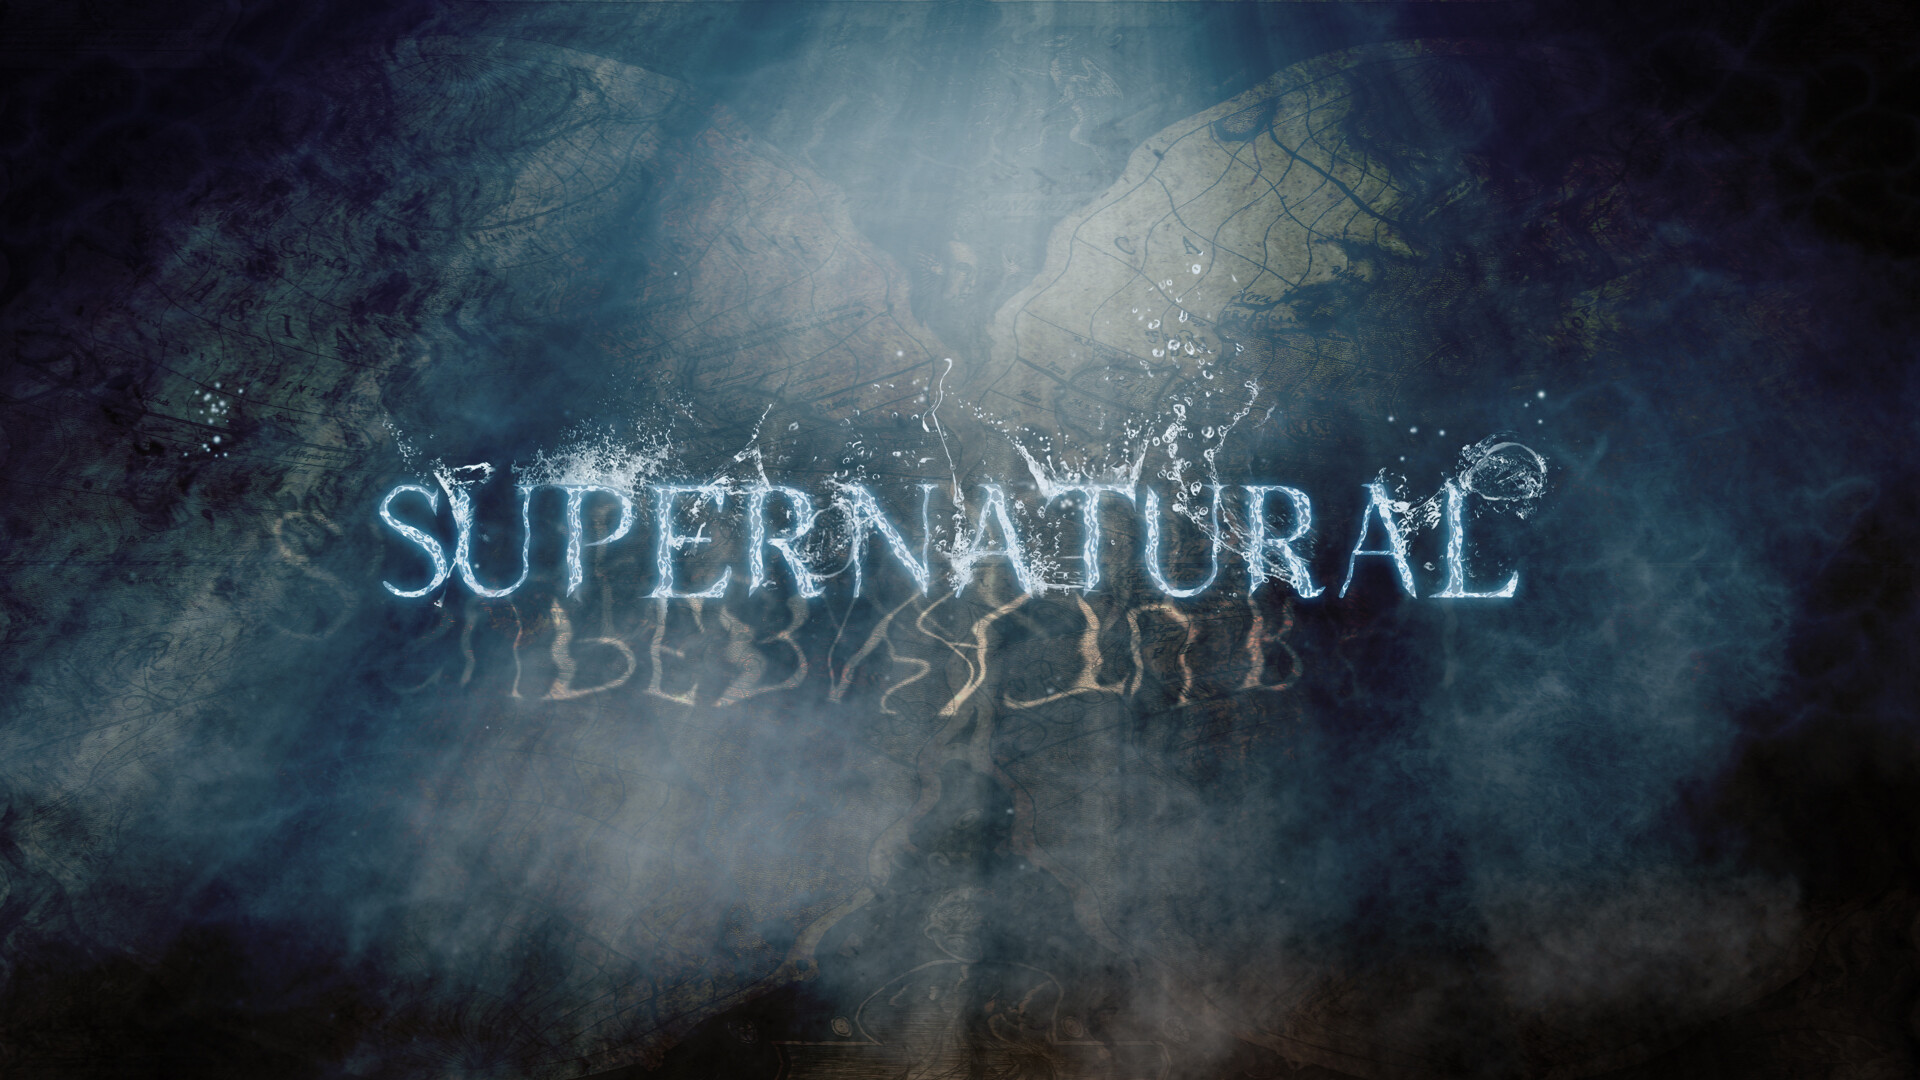 Supernatural: One of the most popular TV shows, mainly because of its longevity, a lovable brother duo, and a cute and hilarious angel. 1920x1080 Full HD Wallpaper.